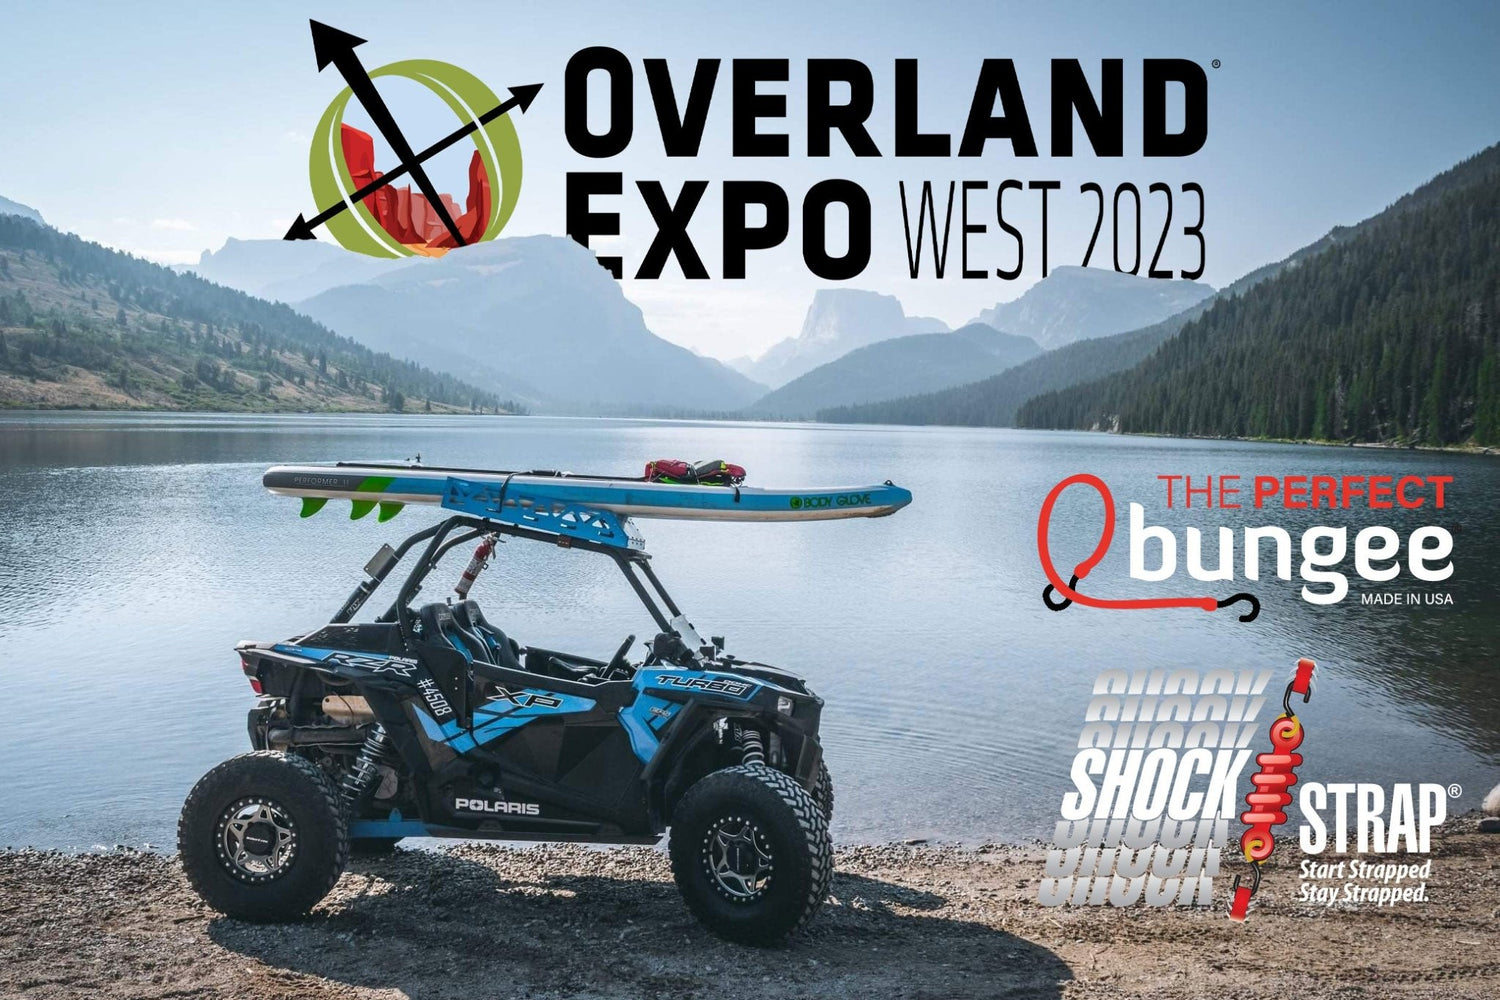 Overland West Expo 2023 - The Perfect Bungee & ShockStrap Tie Downs